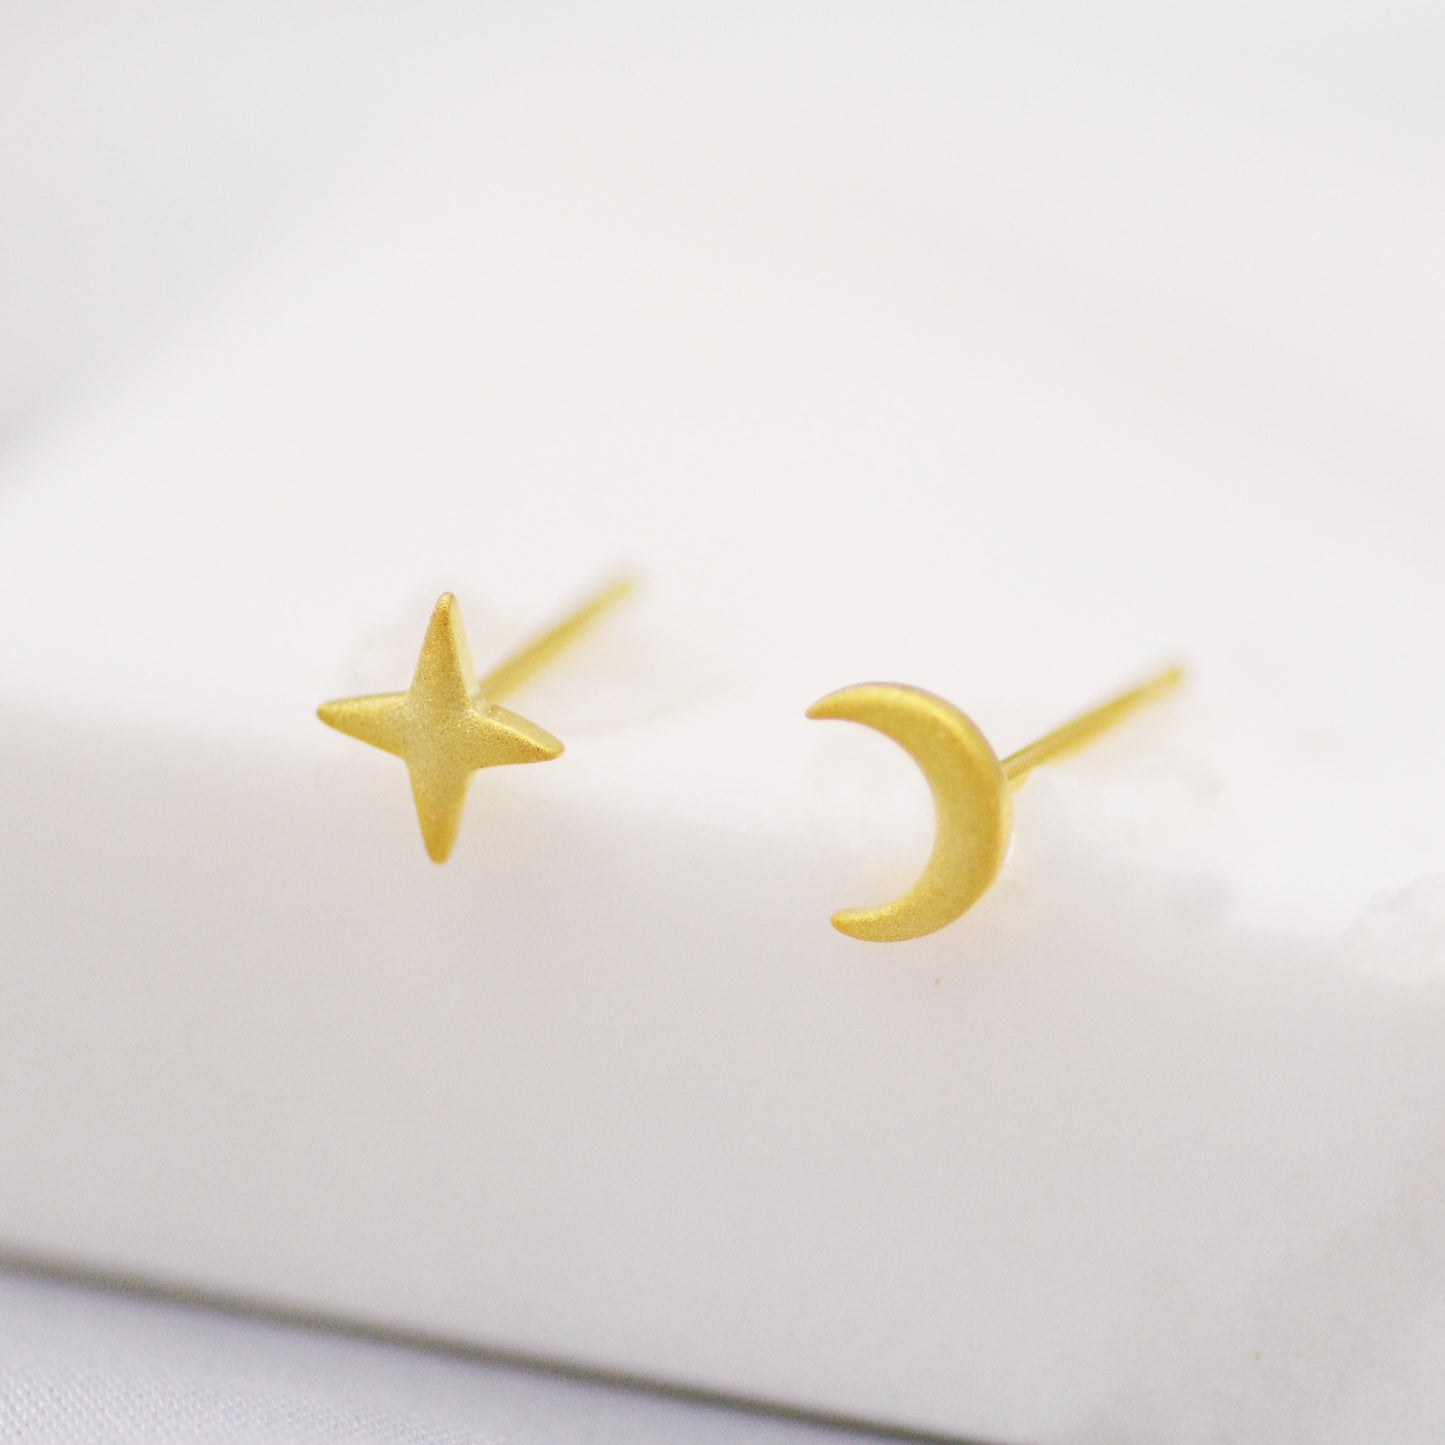 Mismatched Four Point Star and Moon Stud Earrings in Sterling Silver, Crescent Moon Celestial Stud, Polished or Textured, Gold or Silver